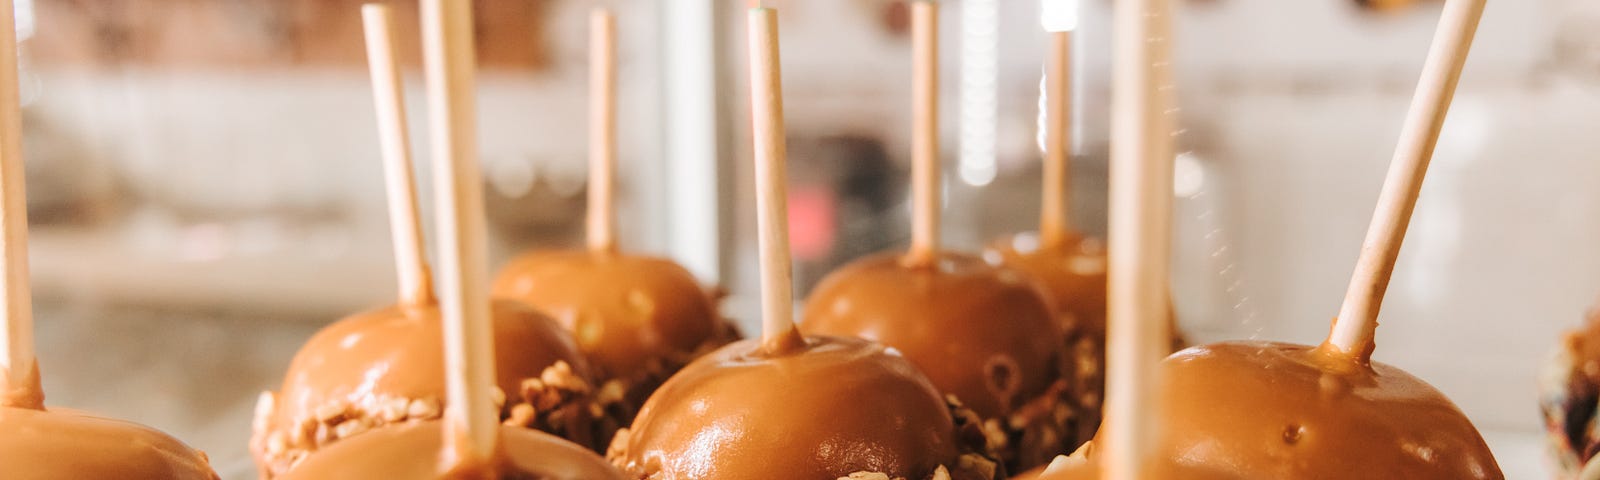 A tray of caramel apples dipped in nuts